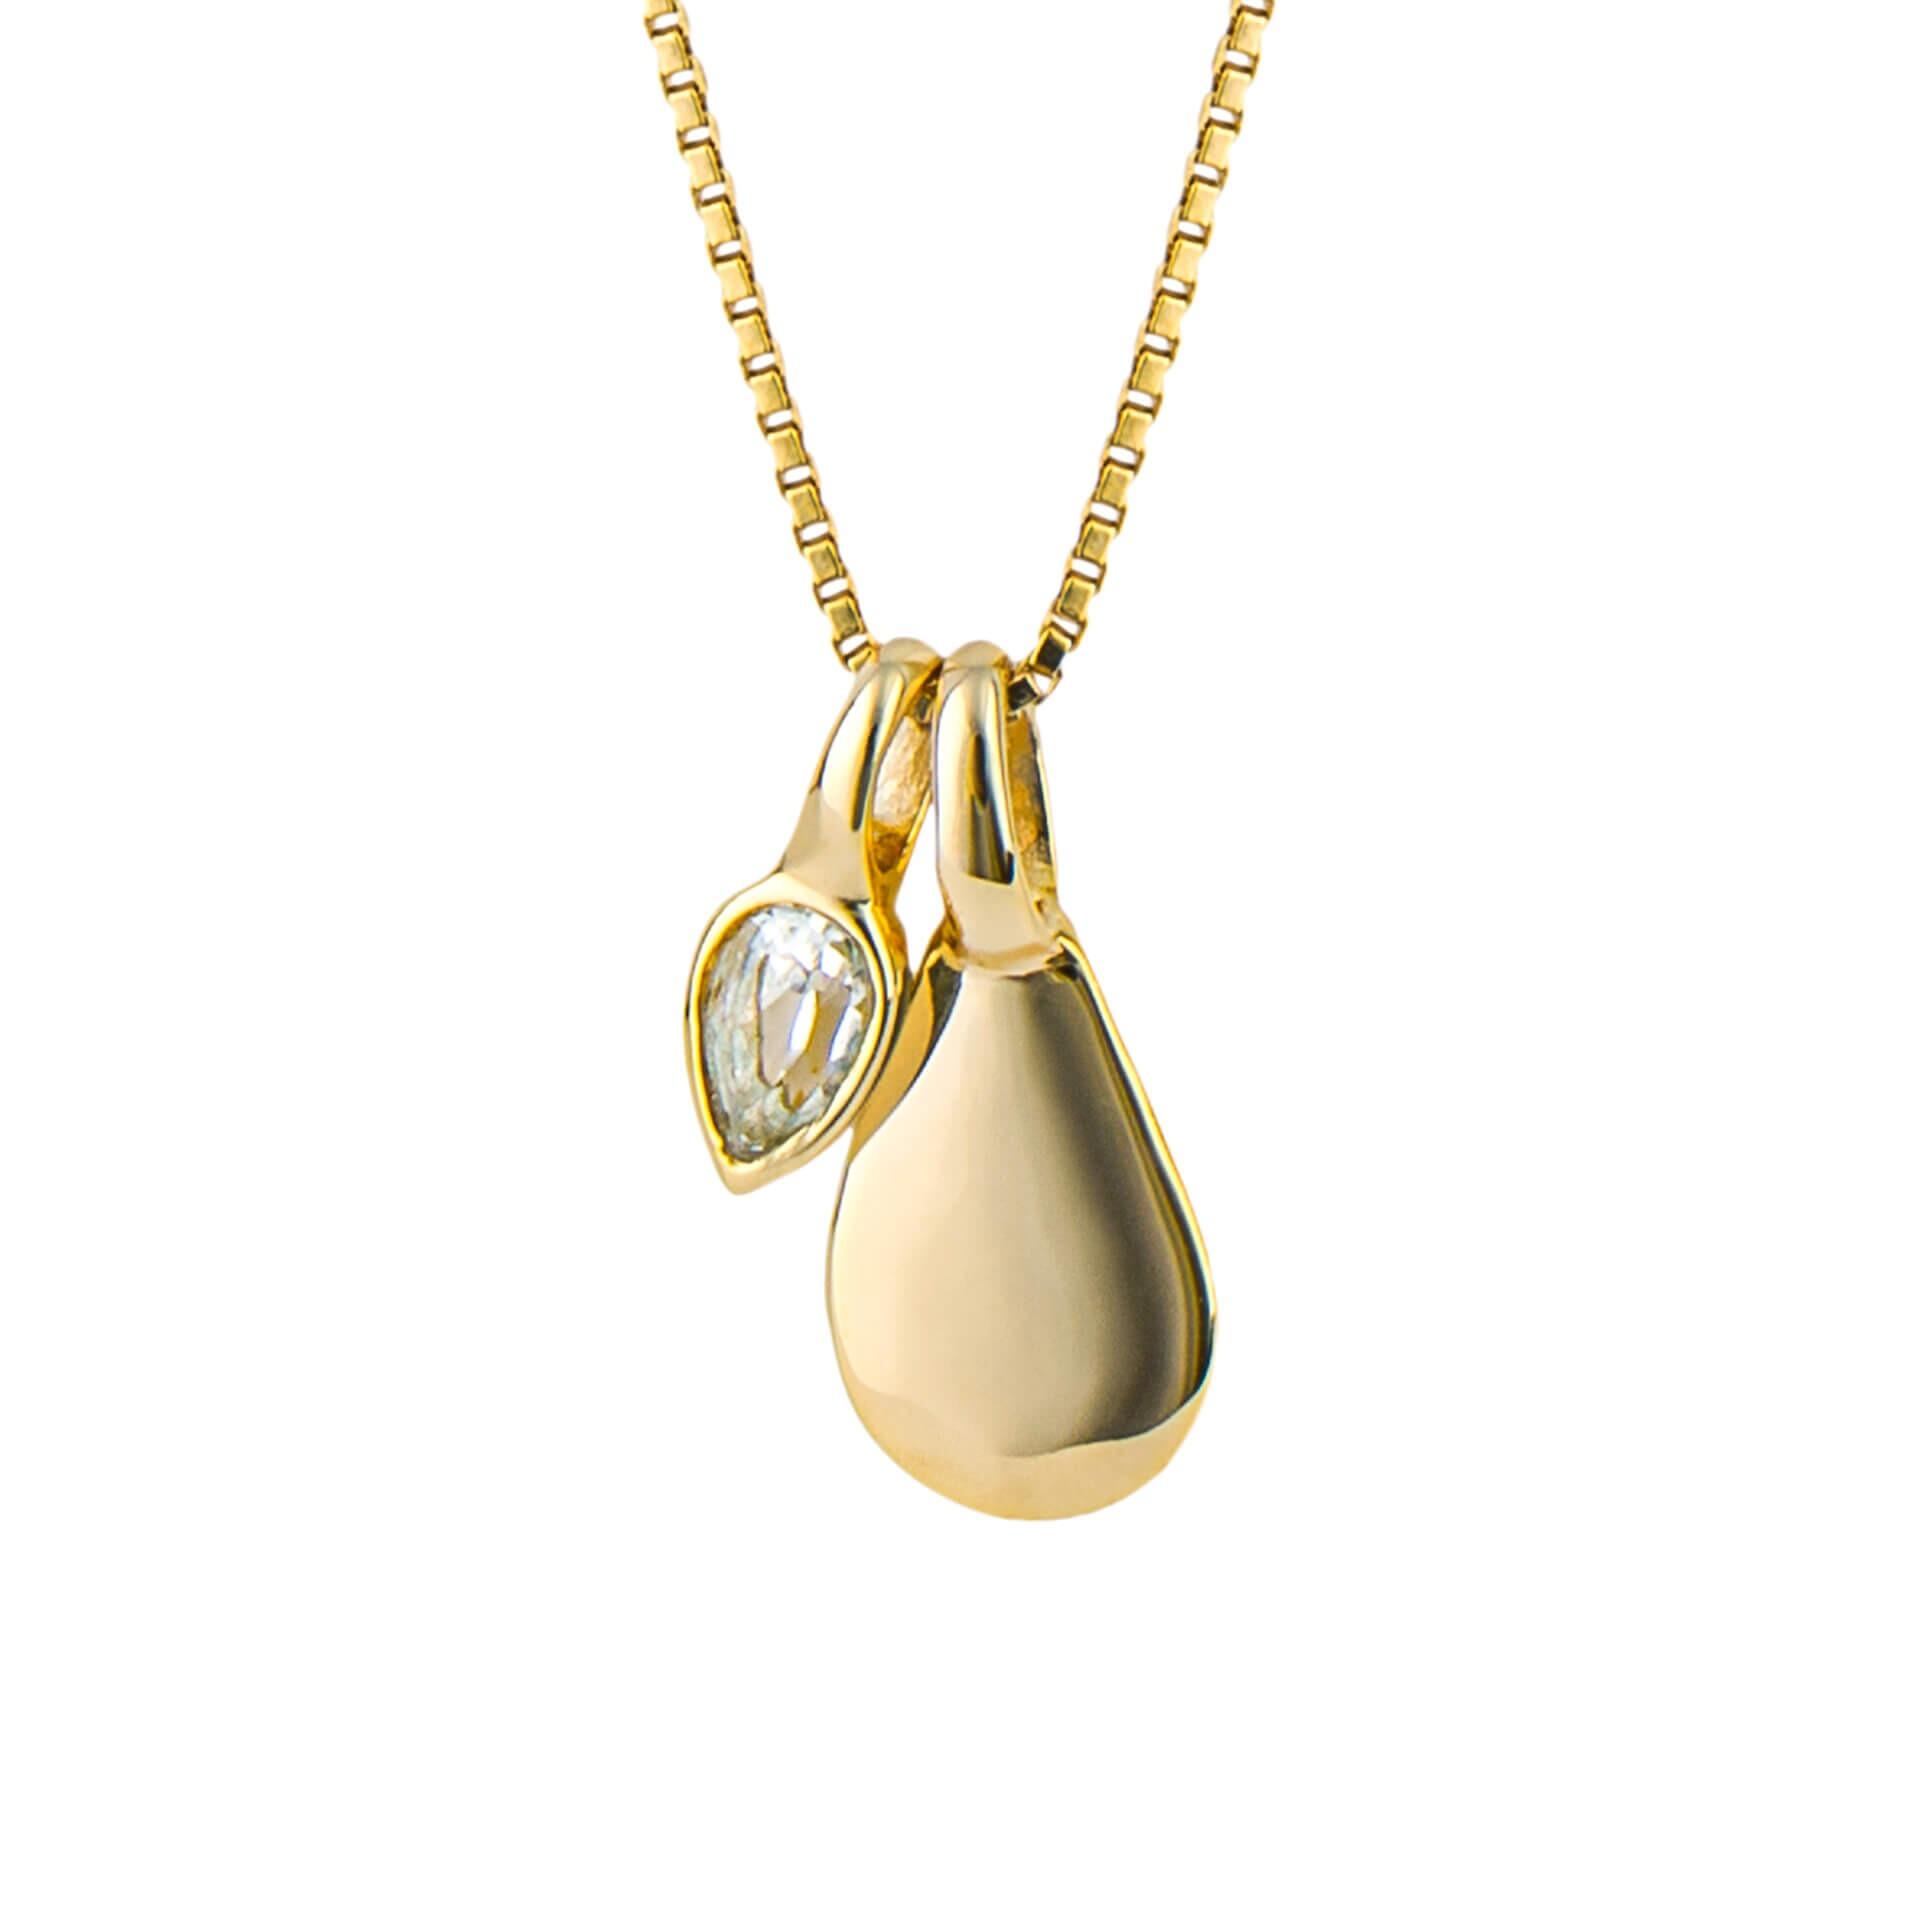 L'appel du vide Chain Necklace in 14ct Gold Vermeil with White Topaz –  SelfPublished